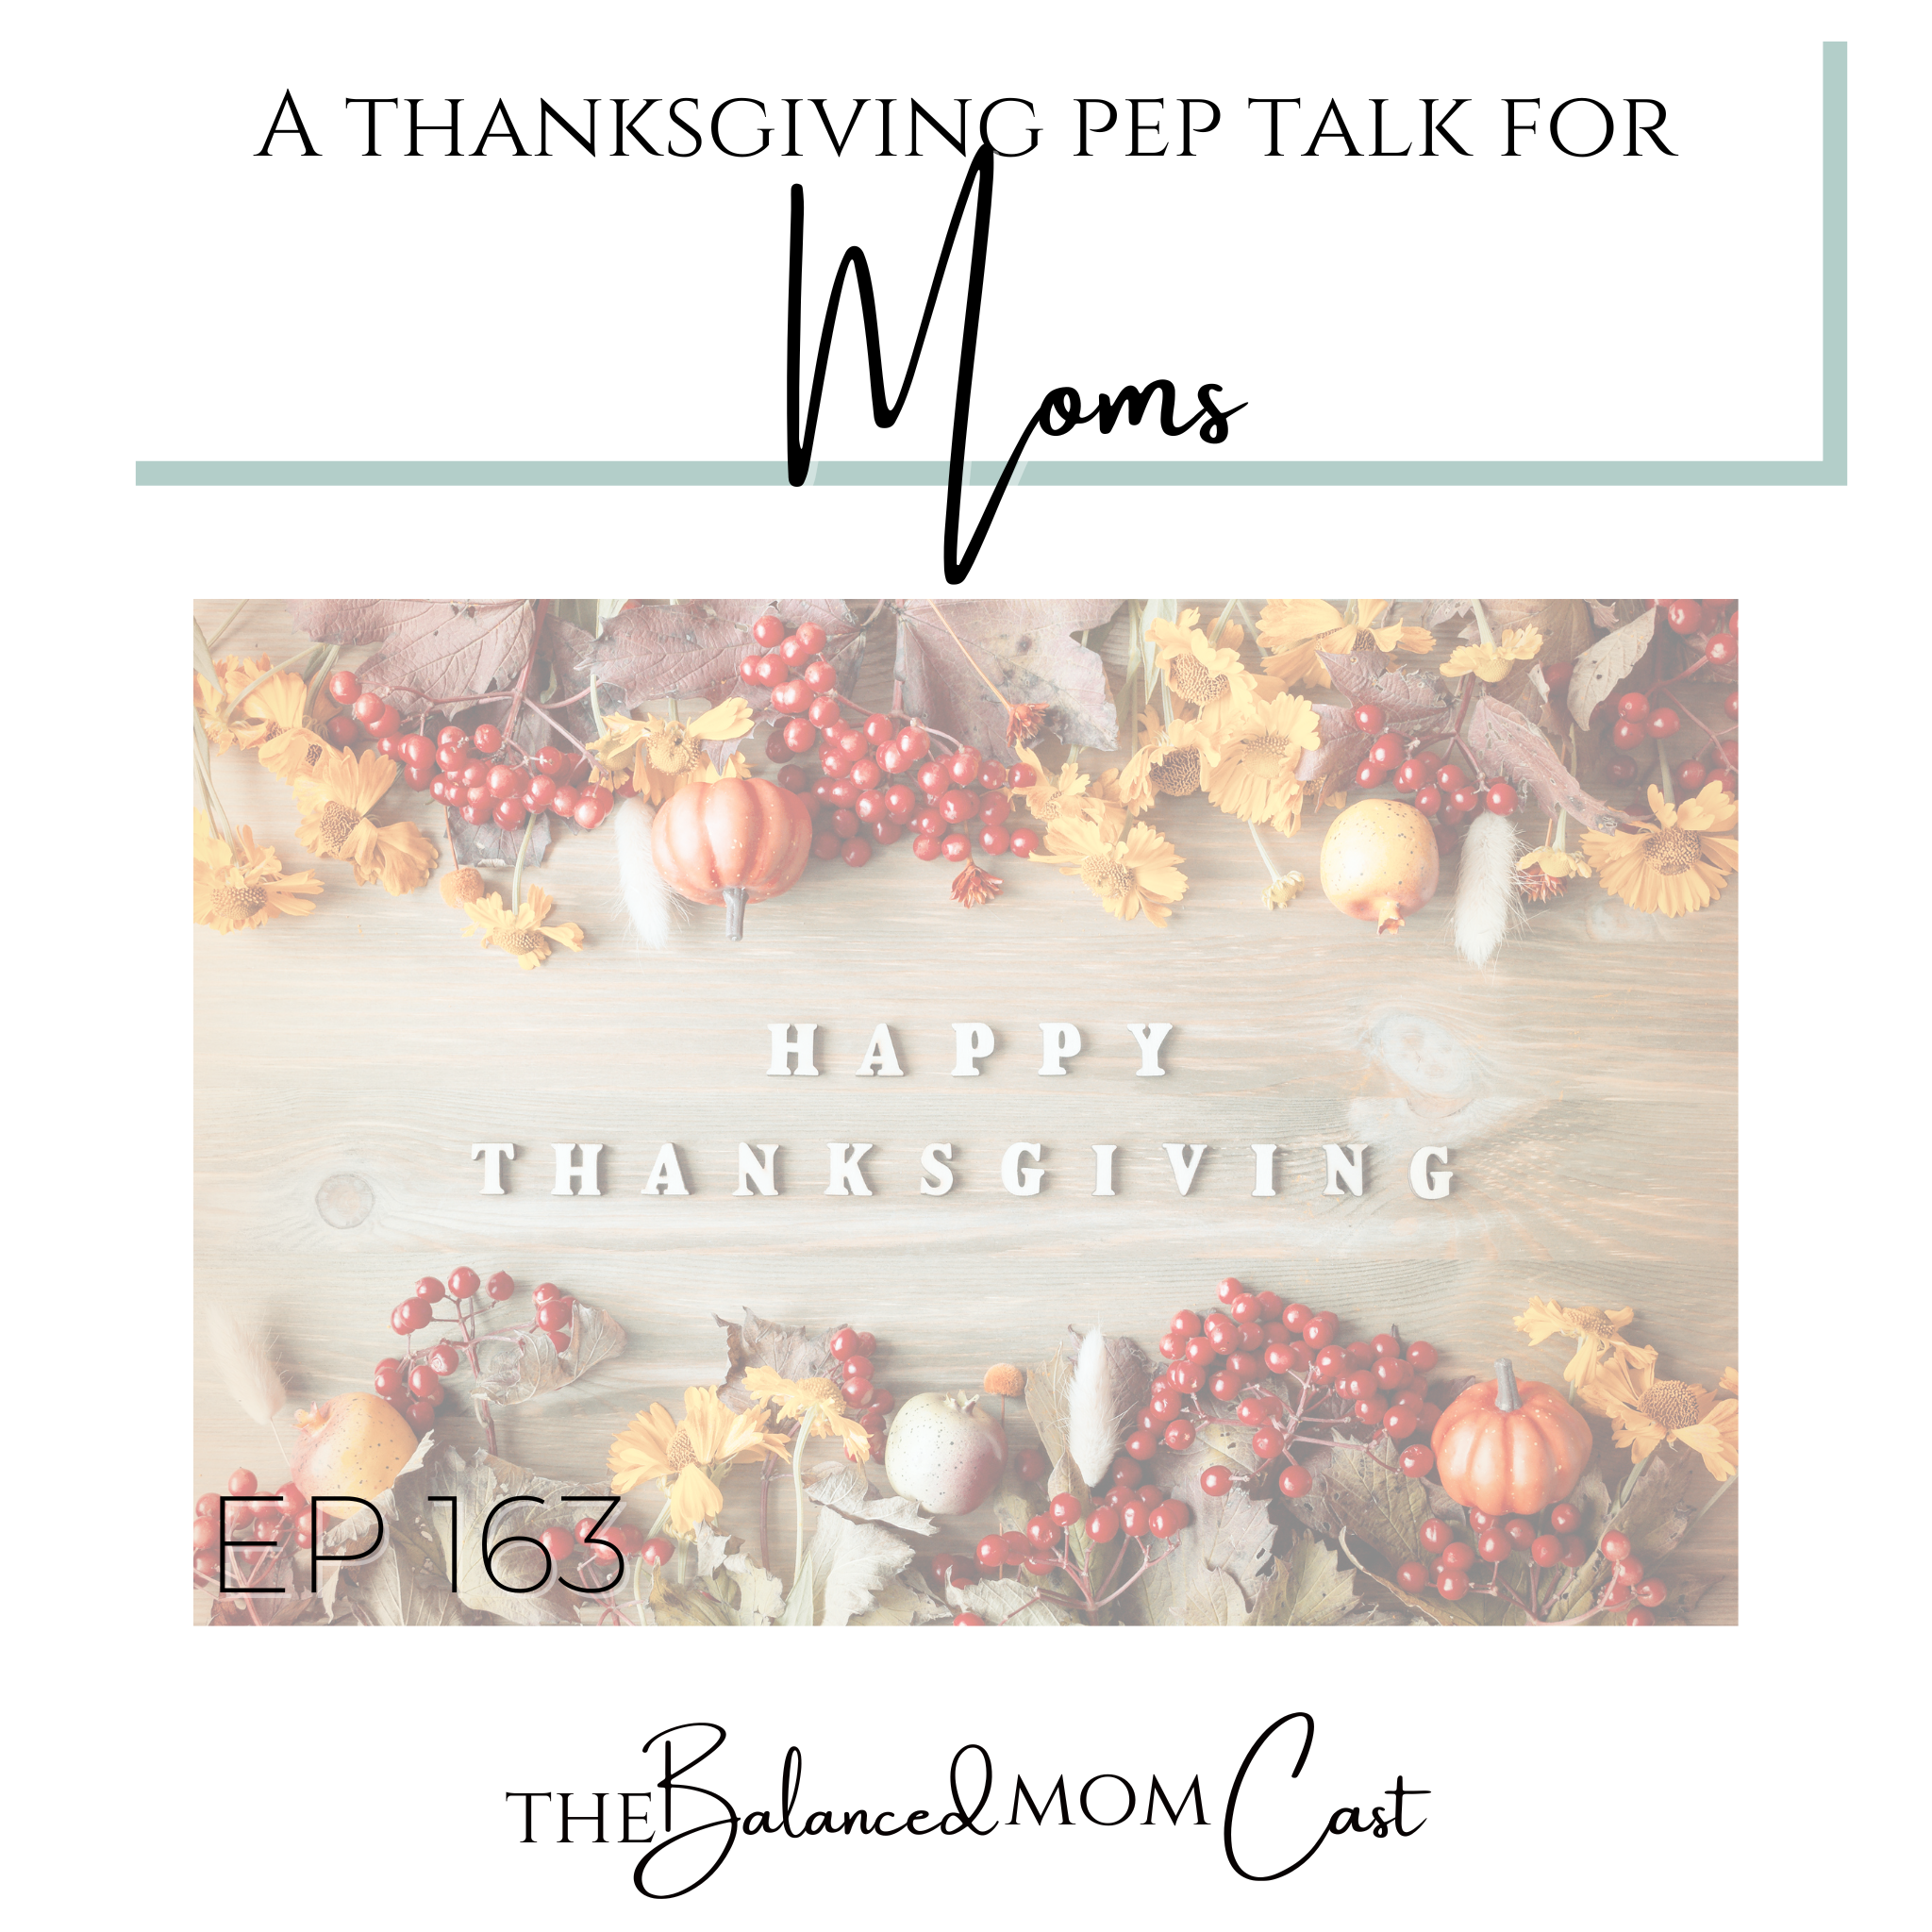 Ep 163: A Thanksgiving Pep Talk for Moms